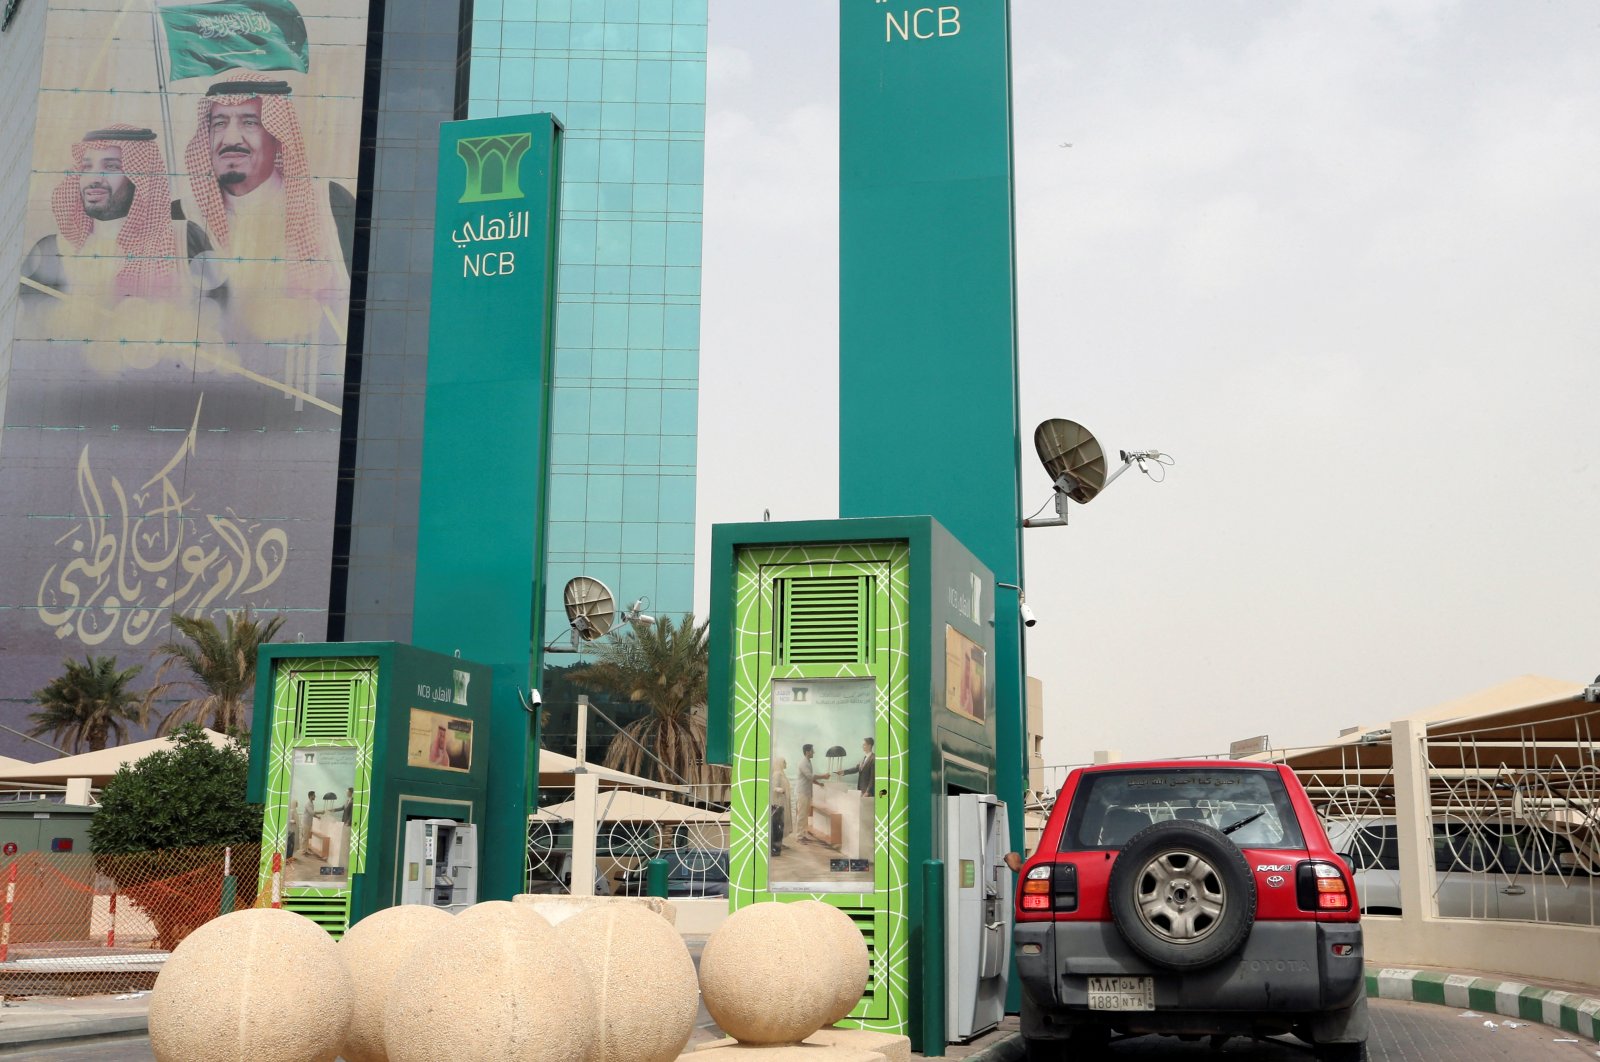 A man in a car withdraws money from an ATM outside the Saudi National Commercial Bank (NCB), in Riyadh, Saudi Arabia, March 18, 2020. (Reuters Photo)